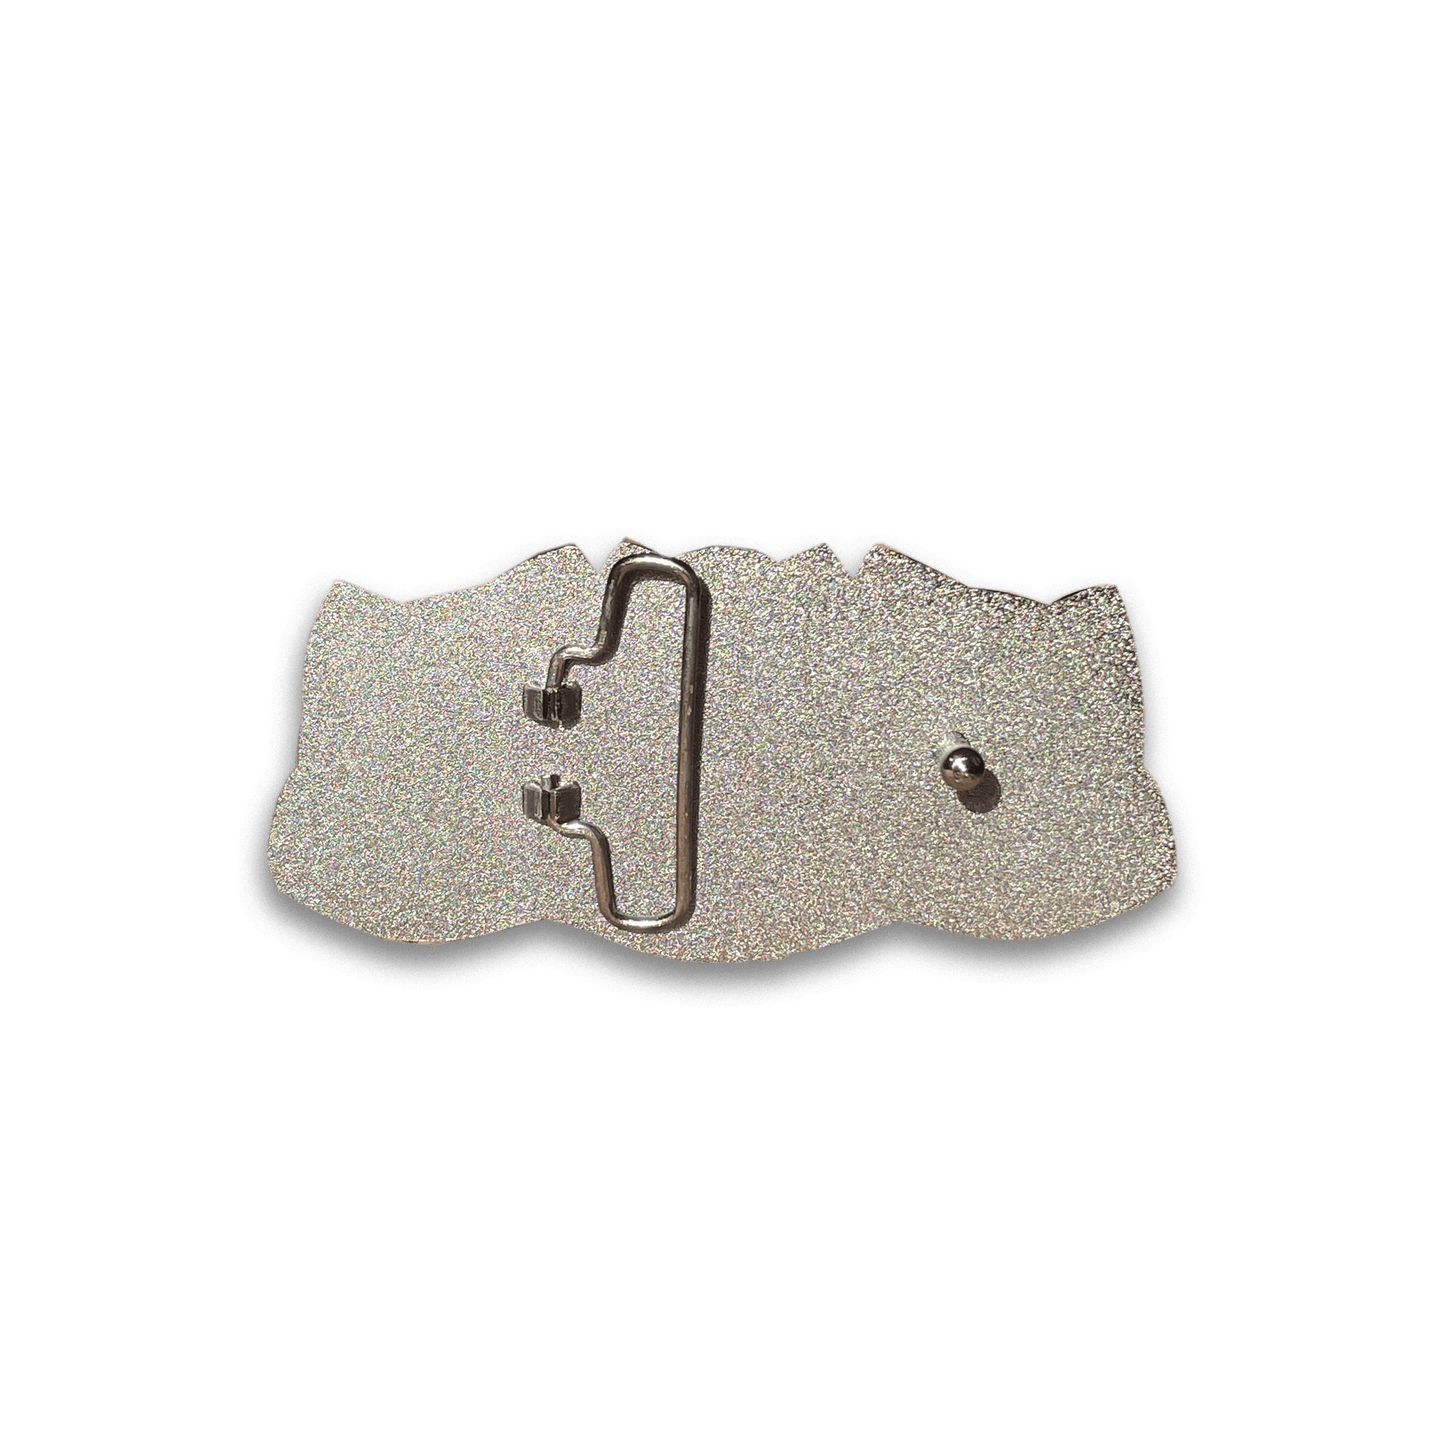 Angry Cat Belt Buckle